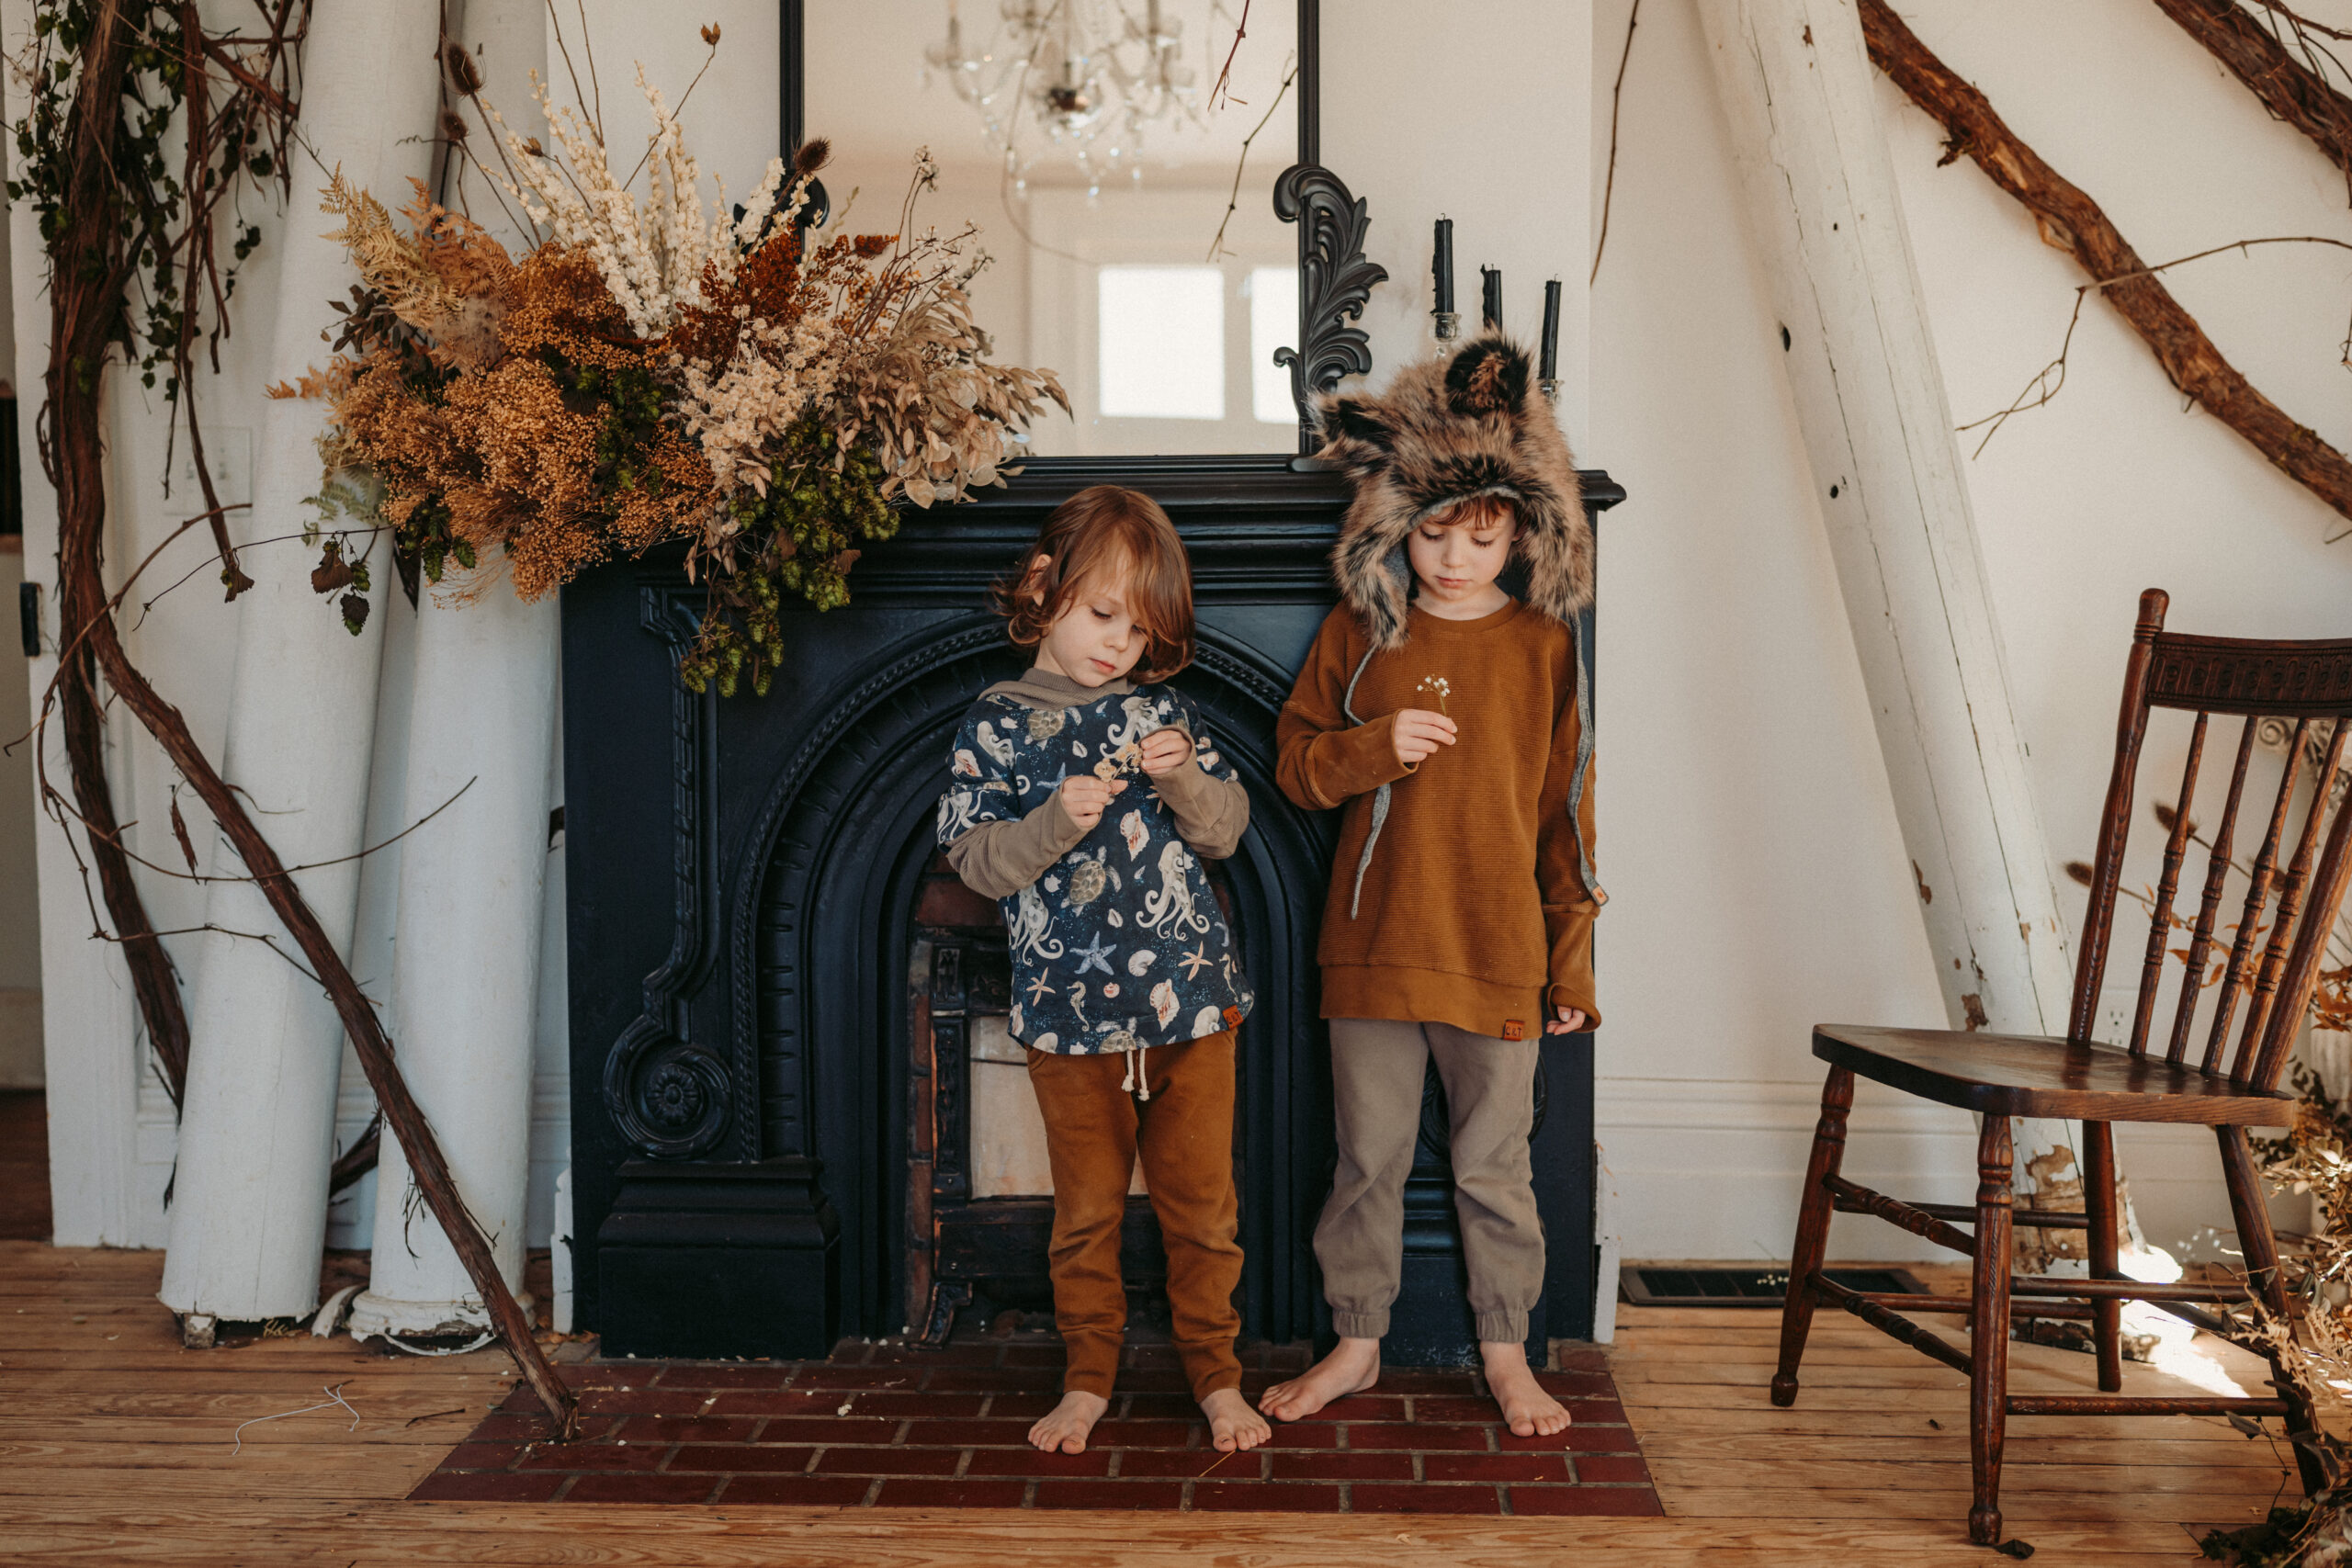 Two boys wearing furry animal bonnets stand in front of a black fireplace surrounded by dried flowers.